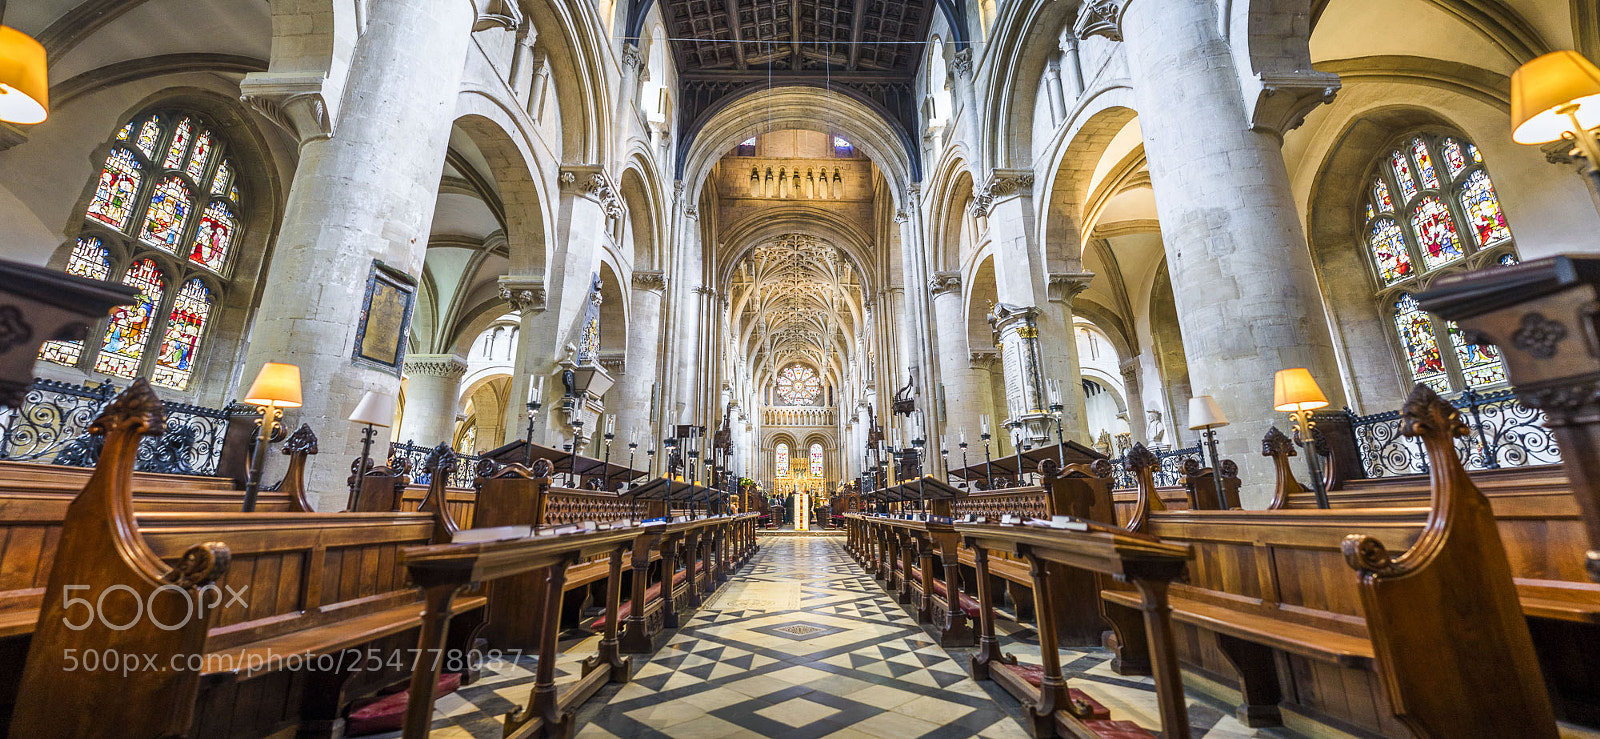 Sony a7 sample photo. Christ church cathedral at photography